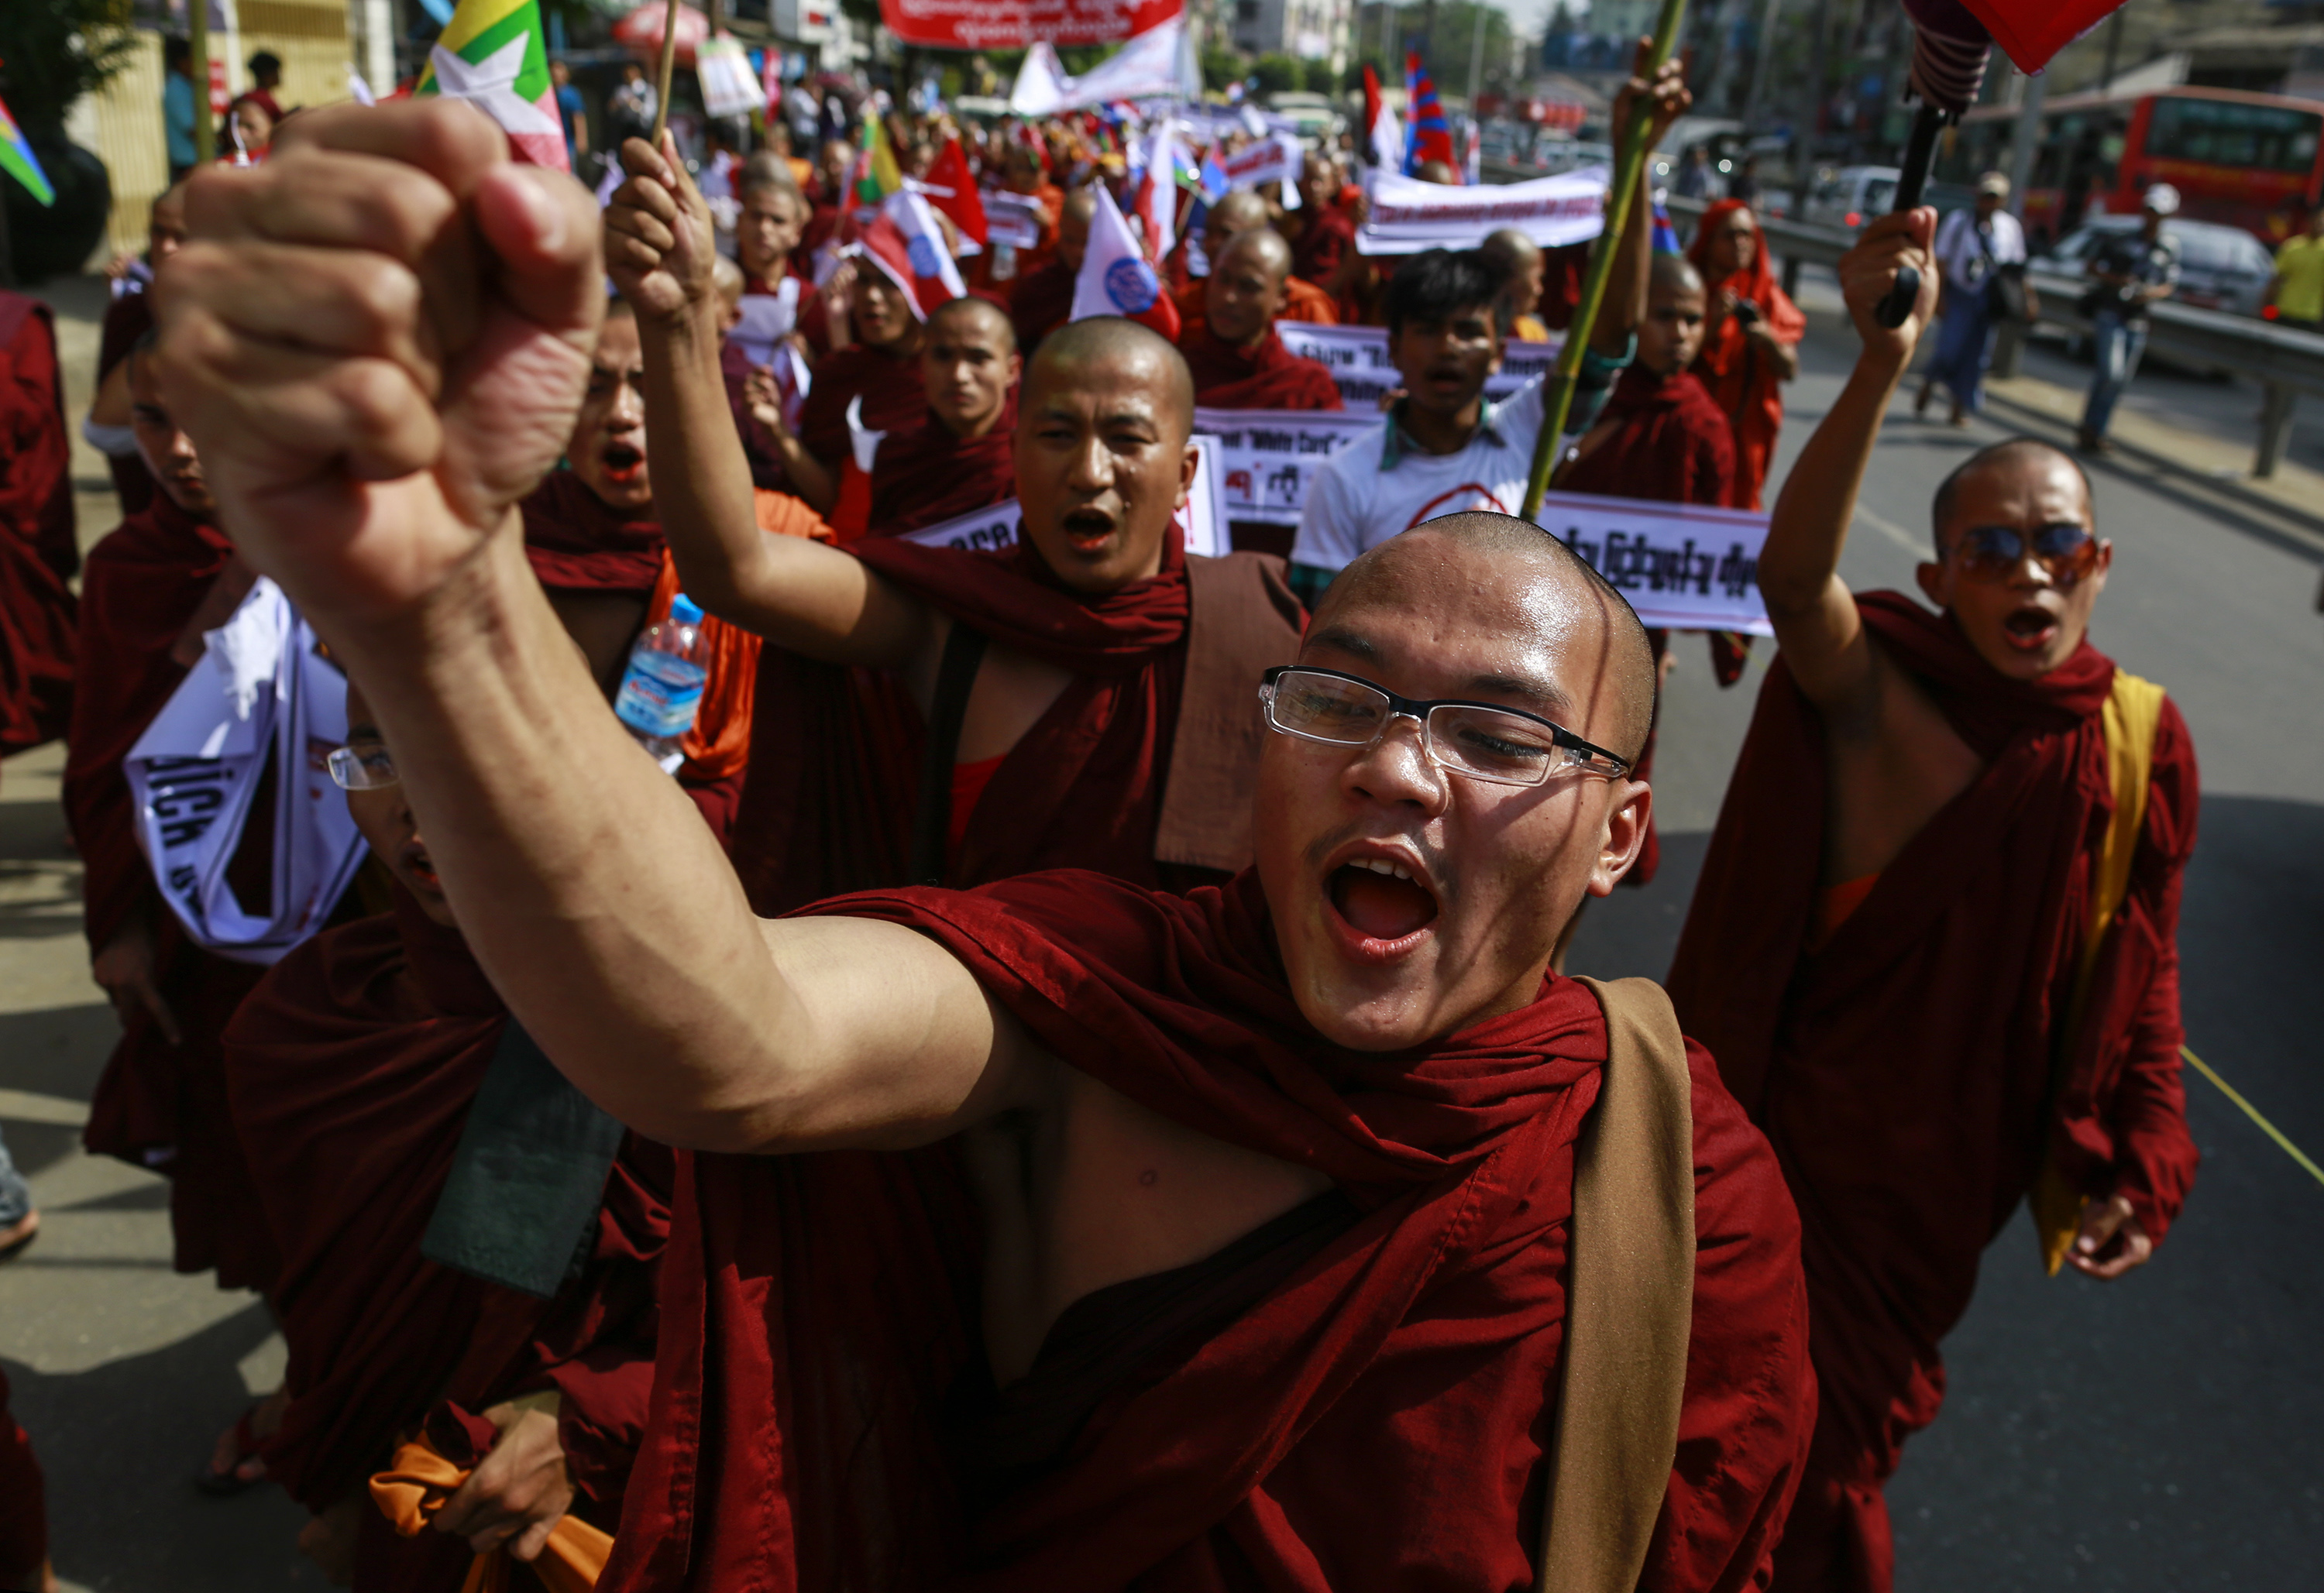 Buddhist monks and other people take part in a protest to demand the revocation of the right of holders of temporary identification cards to vote in Rangoon, Burma, on Feb. 11, 2015 (Soe Zela Tun—Reuters)